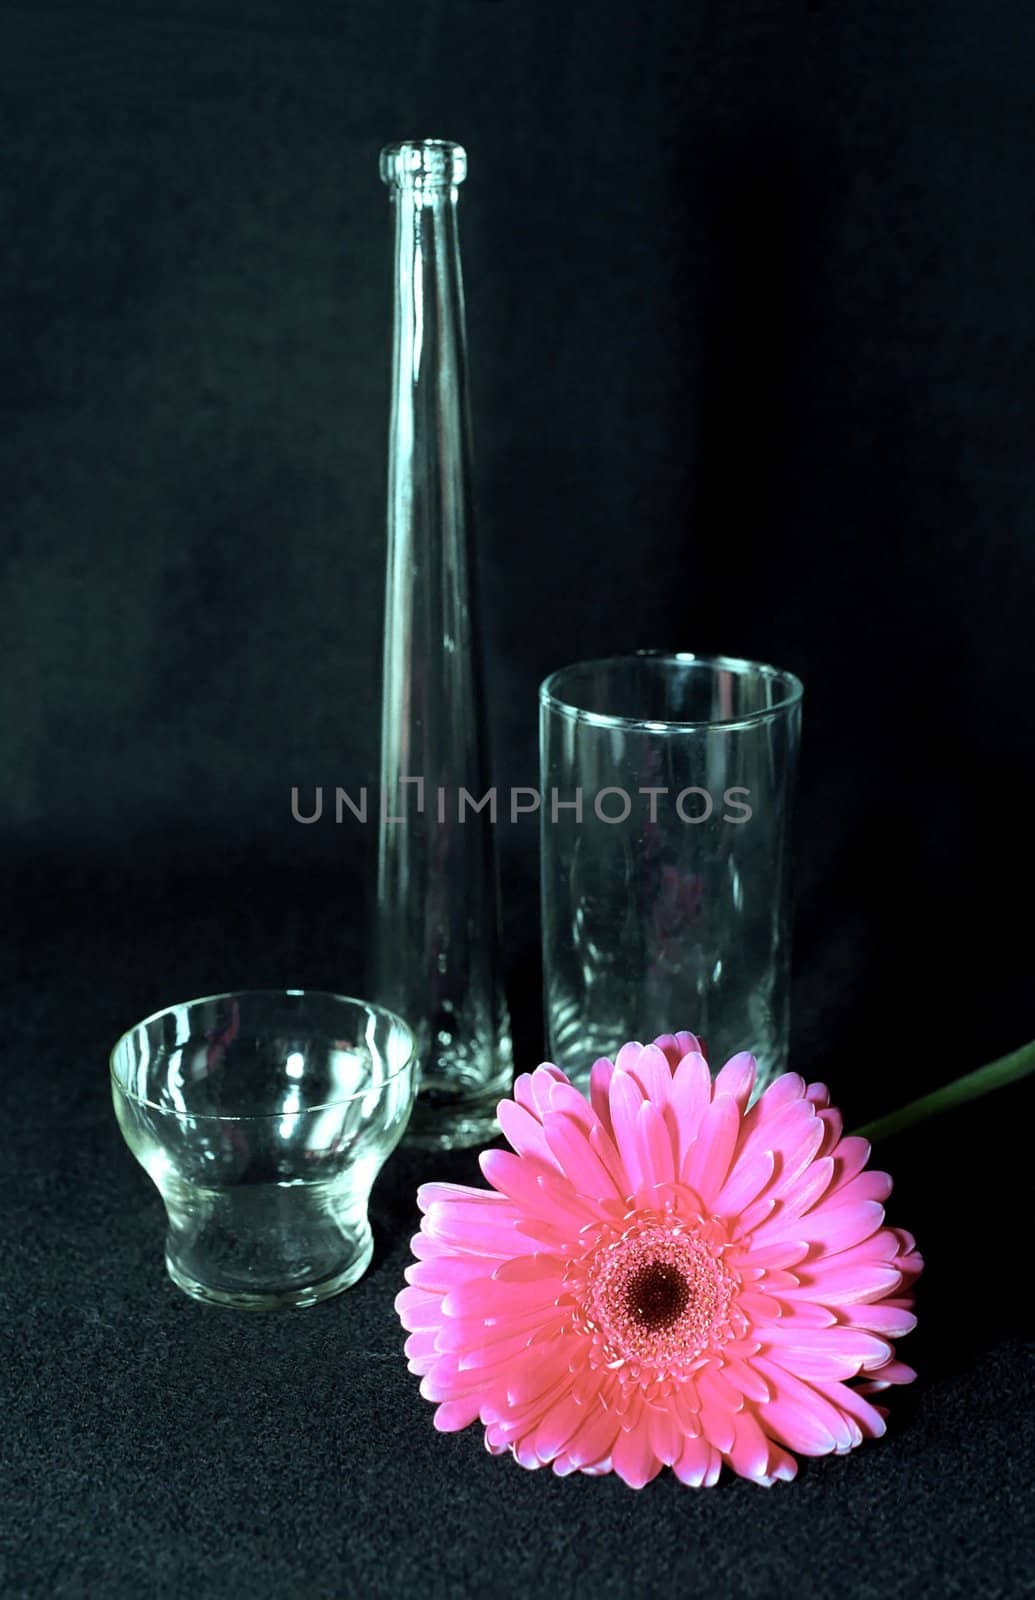 Glass things and rose flower on black background